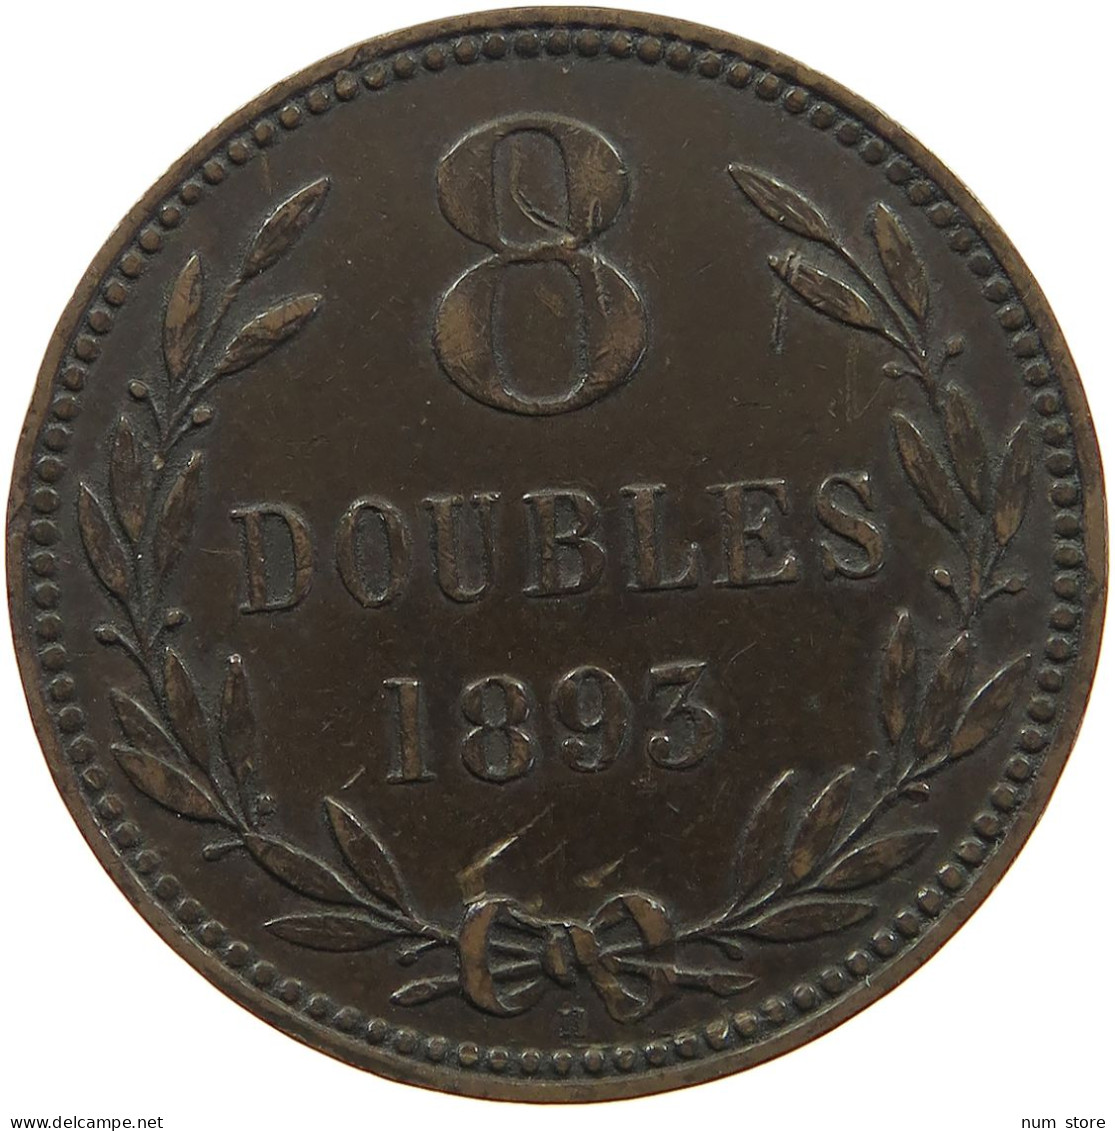 GUERNSEY 8 DOUBLES 1893 Victoria 1837-1901 #c029 0017 - Guernesey